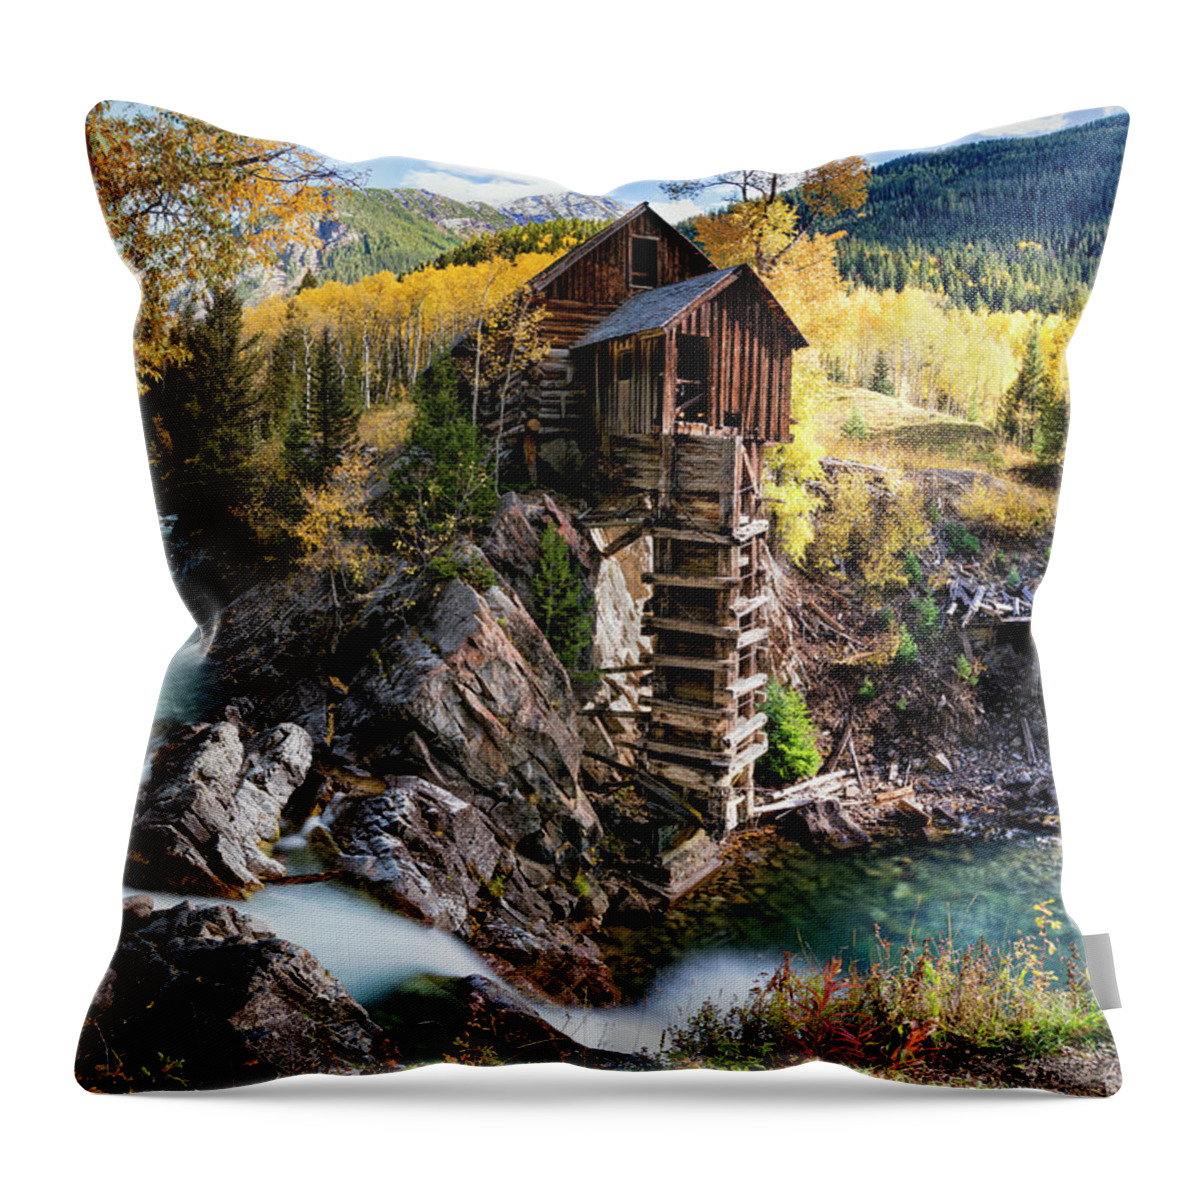 Crystal Mill Throw Pillow featuring the photograph Crystal Mill by David Soldano